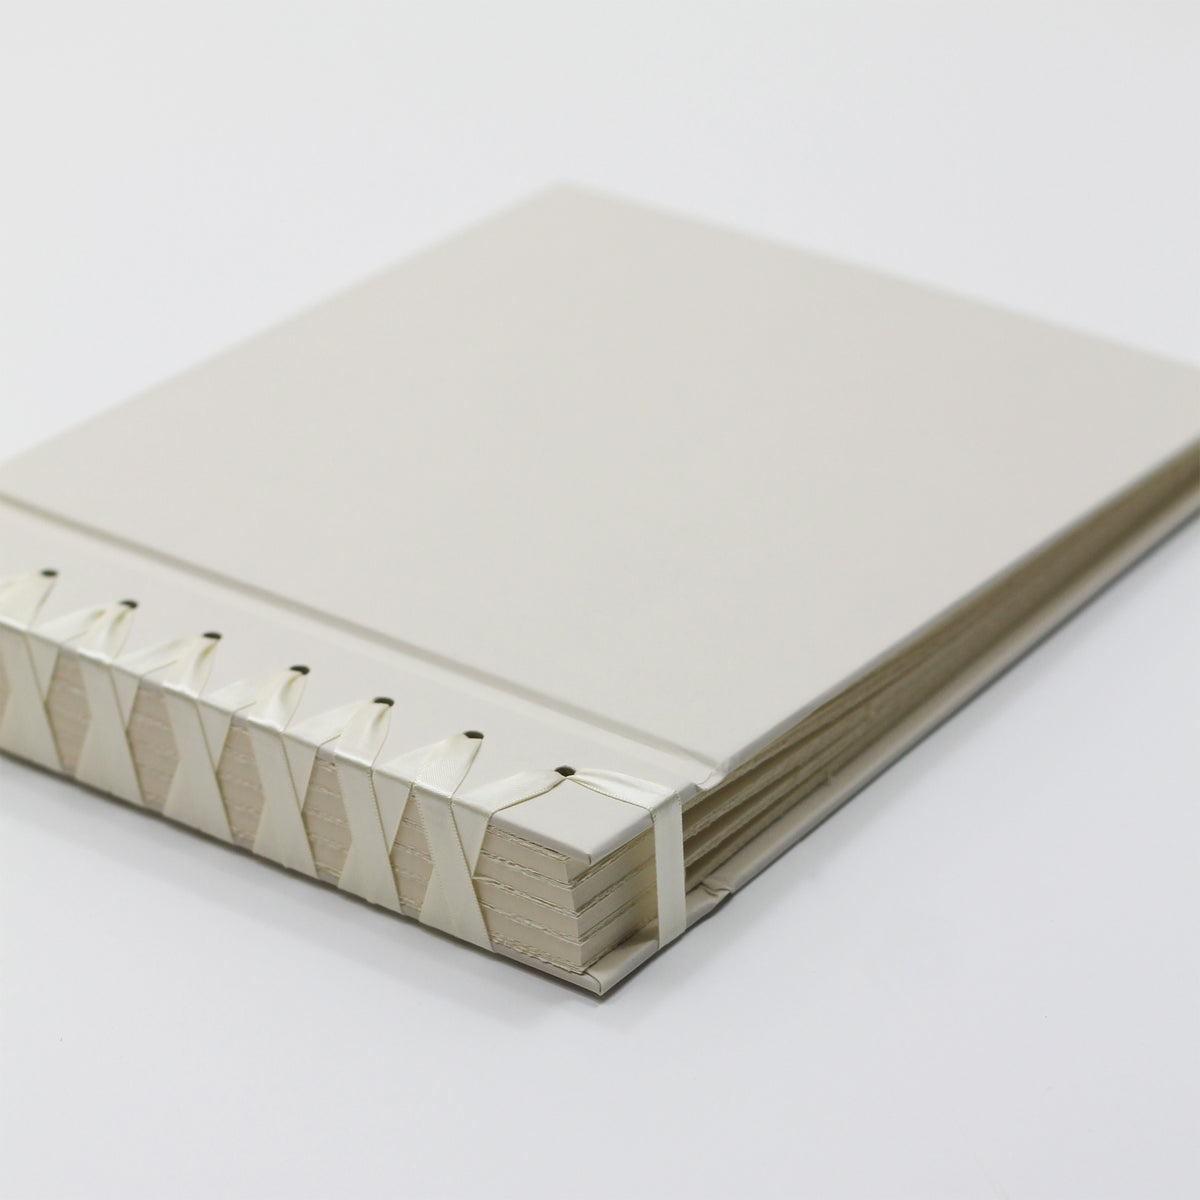 Deluxe 12 x 15 Paper Page Album | Cover: Pearl Vegan Leather | Available Personalized